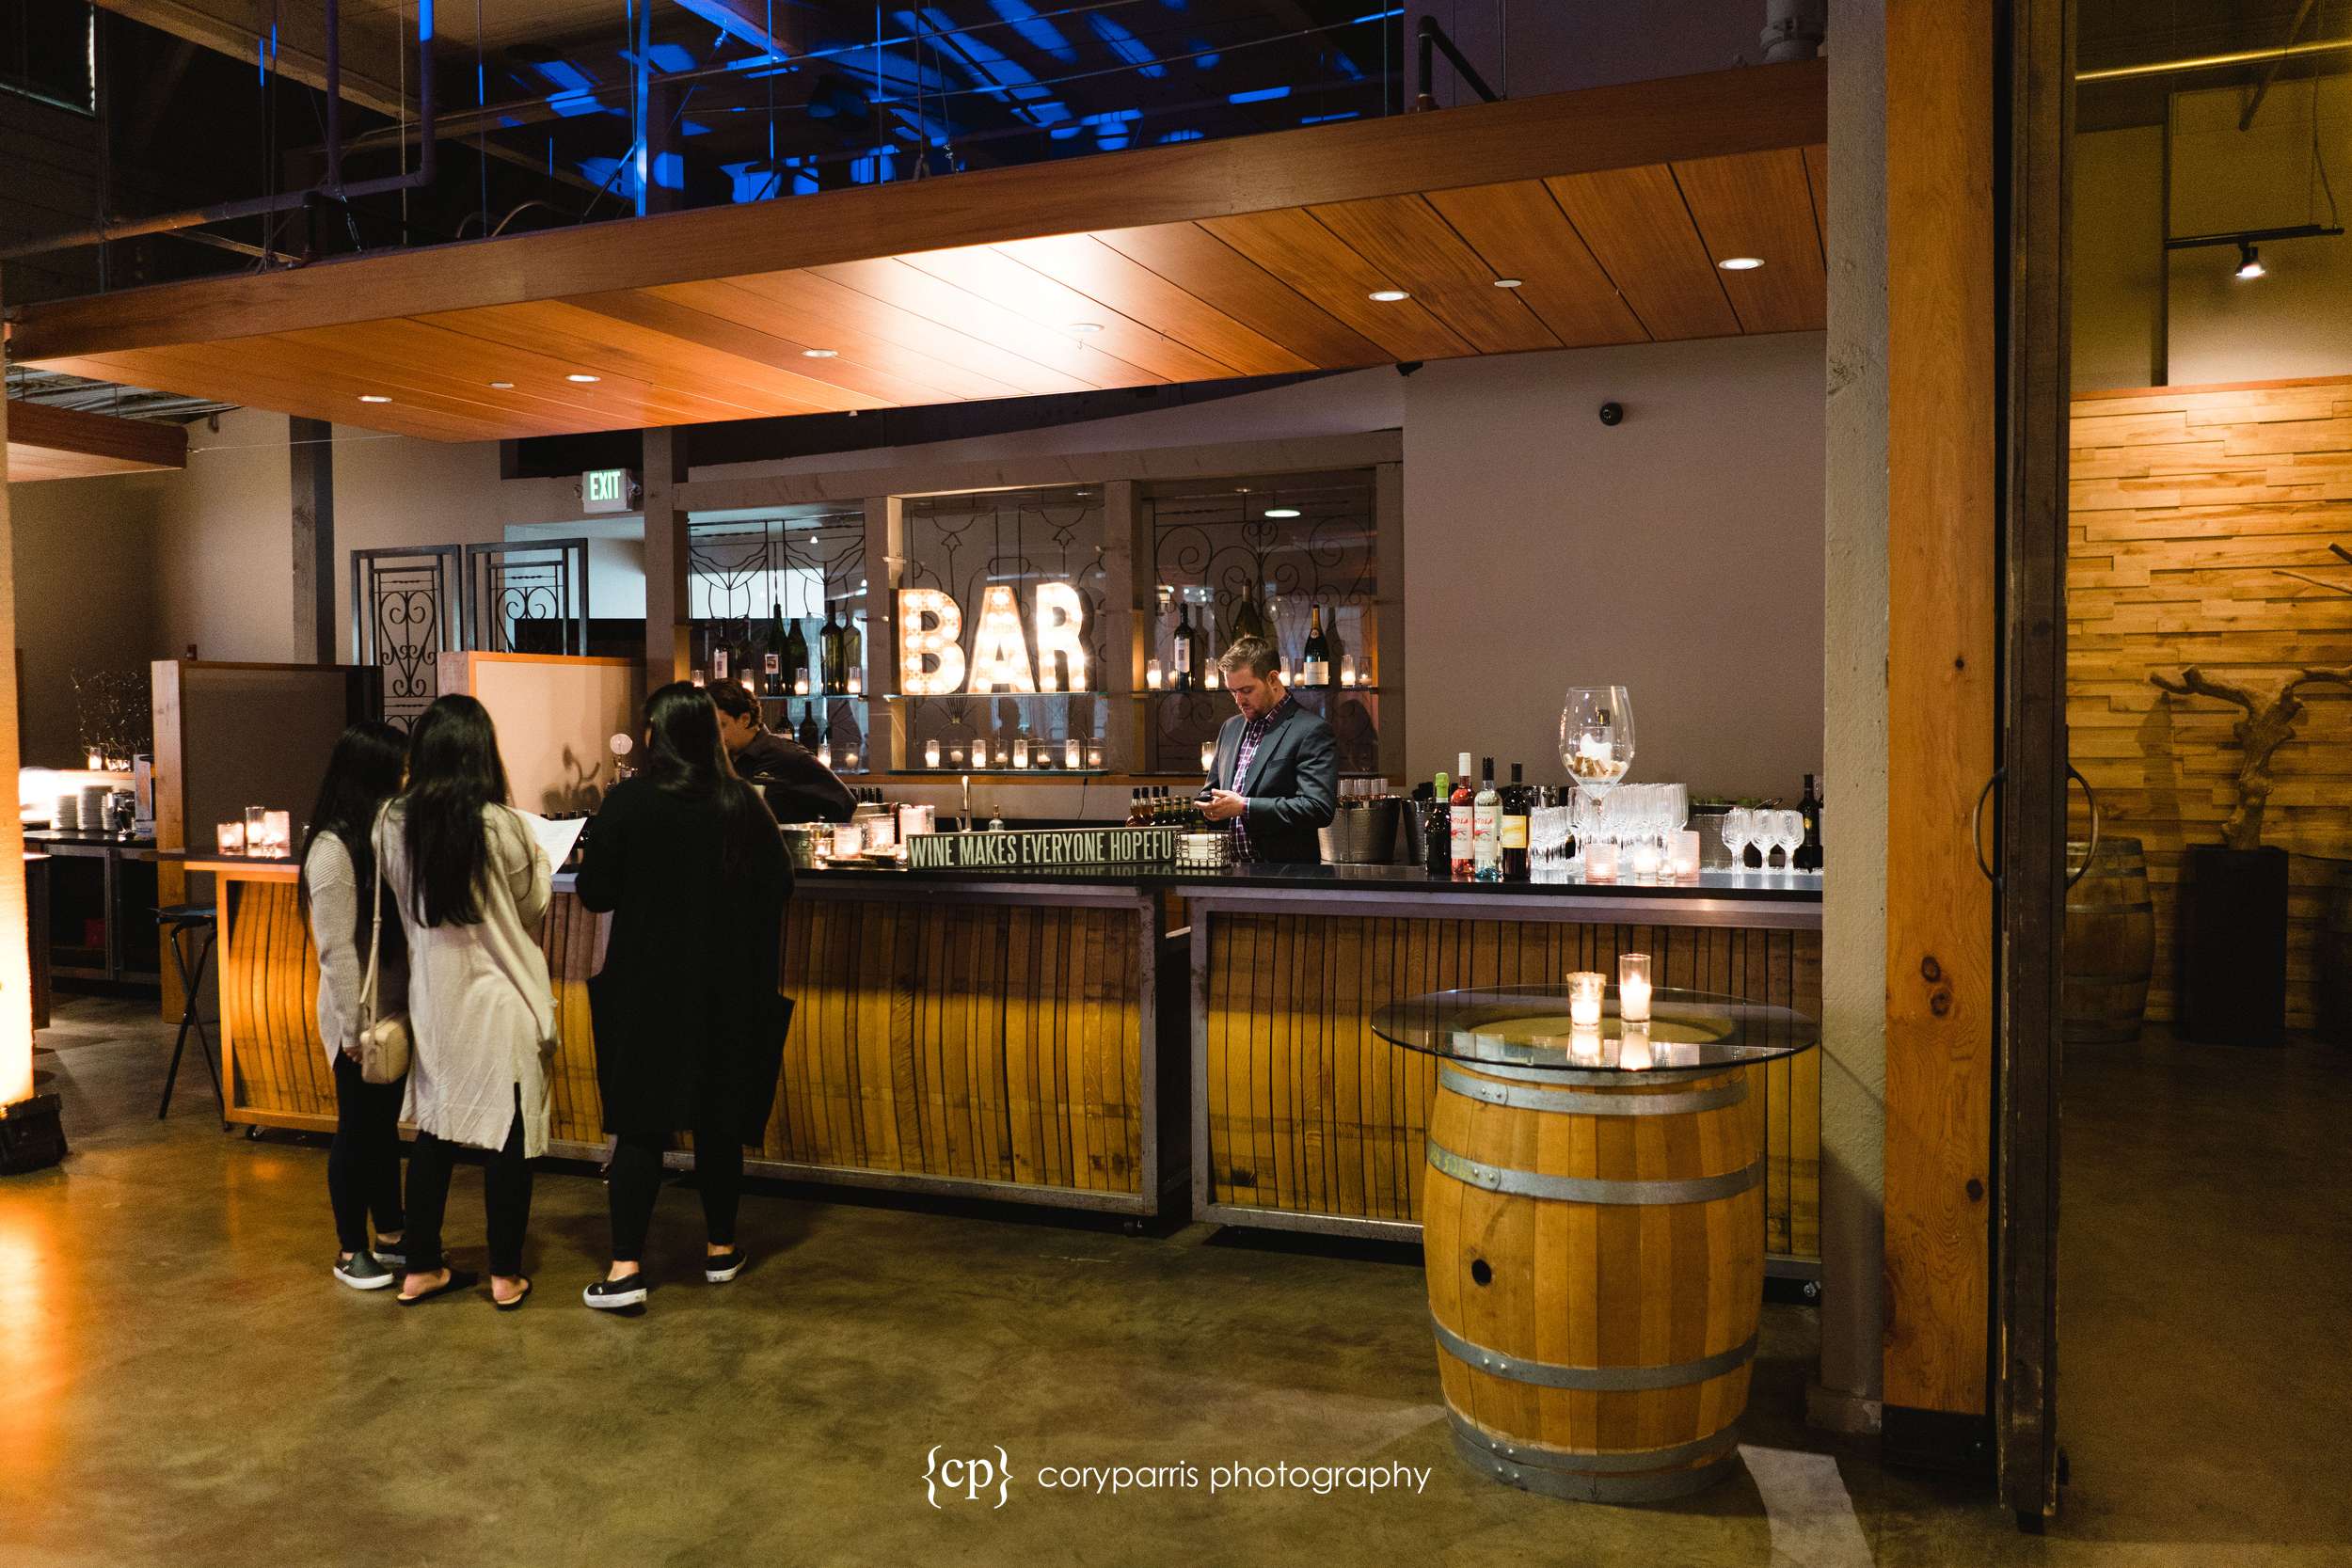 The bar area at The Foundry